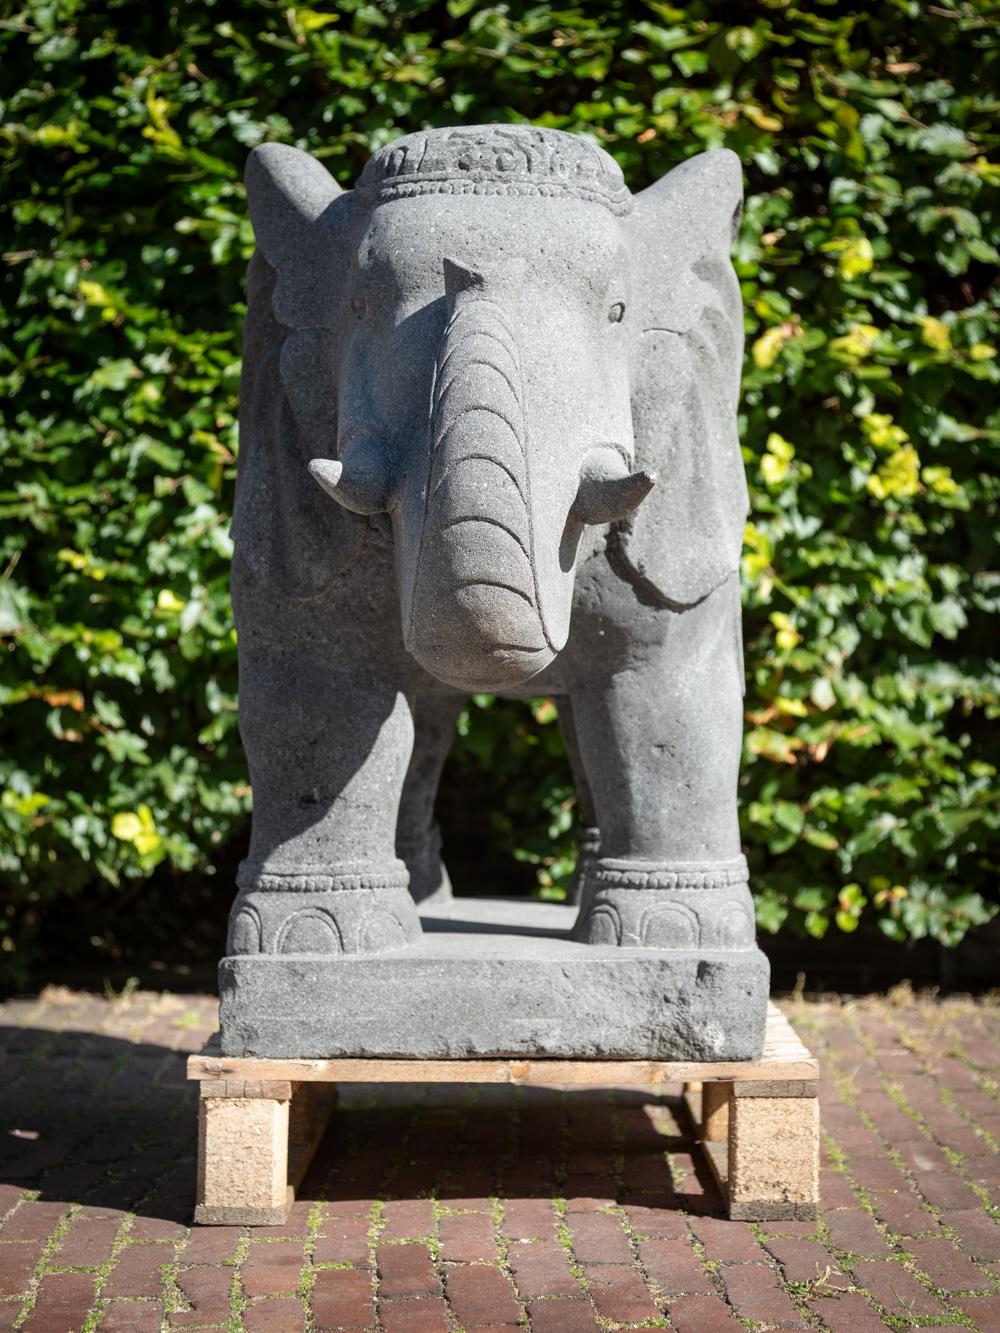 The large lavastone elephant from Indonesia is a truly remarkable and artistically significant artifact originating from the country. Crafted from lavastone, this elephant sculpture stands at an impressive height of 80 cm and measures 47 cm in width